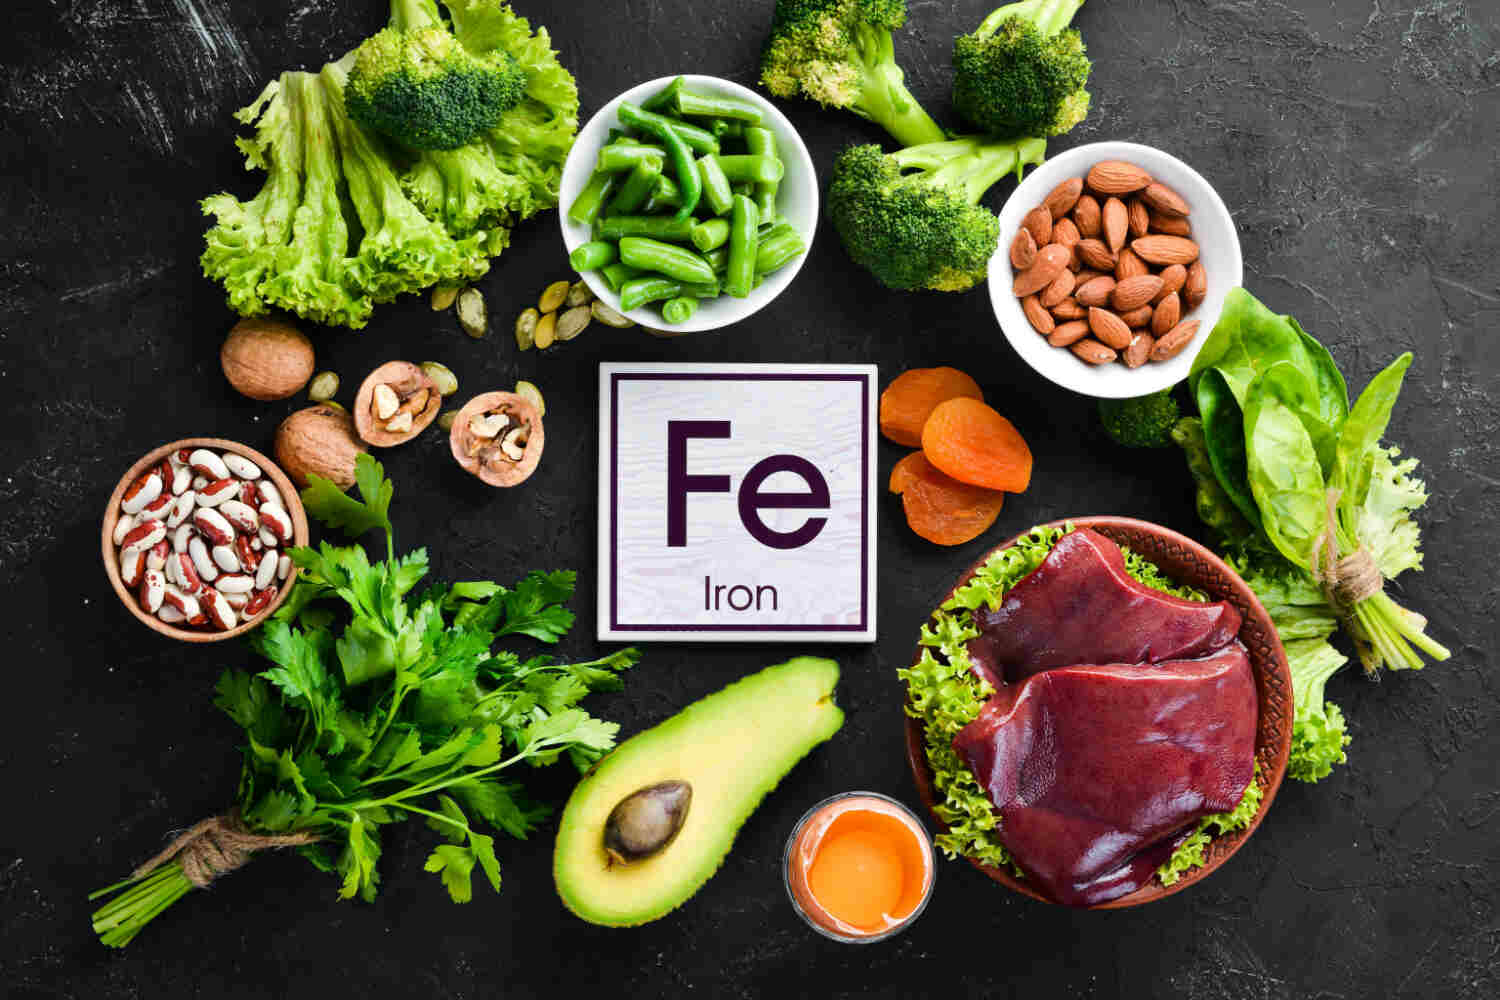 Iron is found in green leafy vegetables and meat